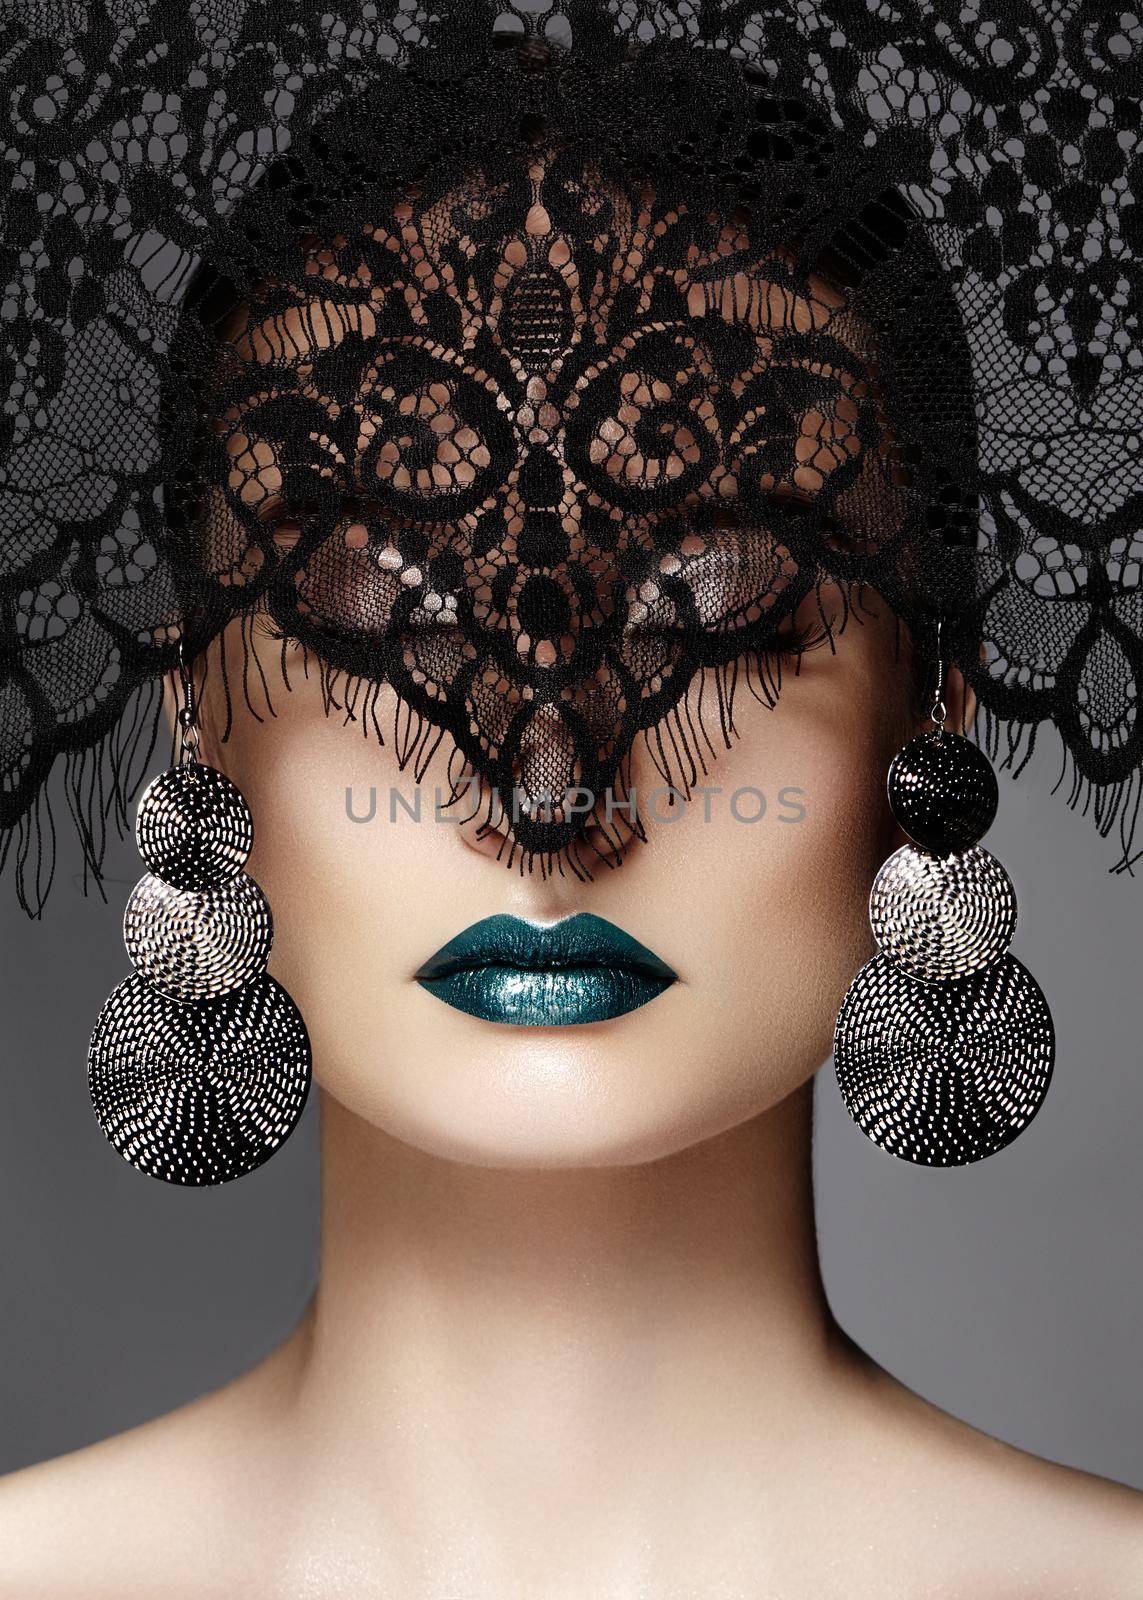 Luxury Woman with Celebrate Fashion Makeup, silver Earrings, black Lace veil. Halloween or Christmas style. Lips Make-up by MarinaFrost